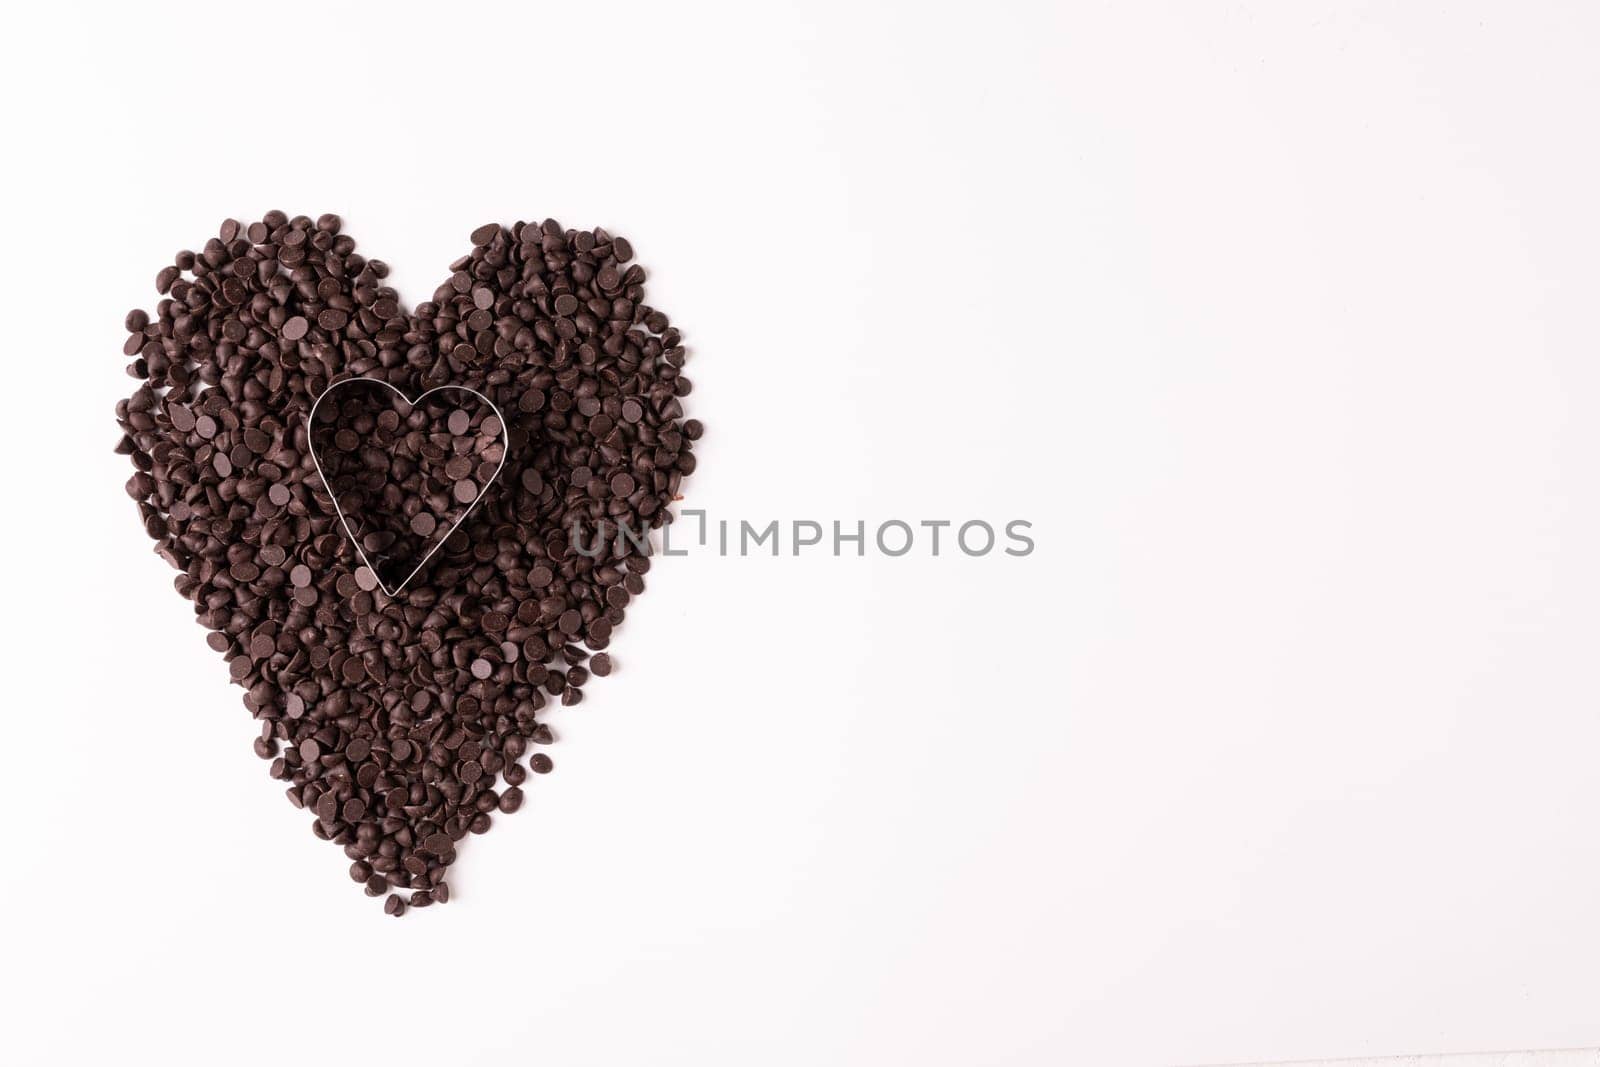 Overhead view of heart shape pastry cutter on chocolate chips by copy space over white background. unaltered, sweet food and unhealthy eating concept.